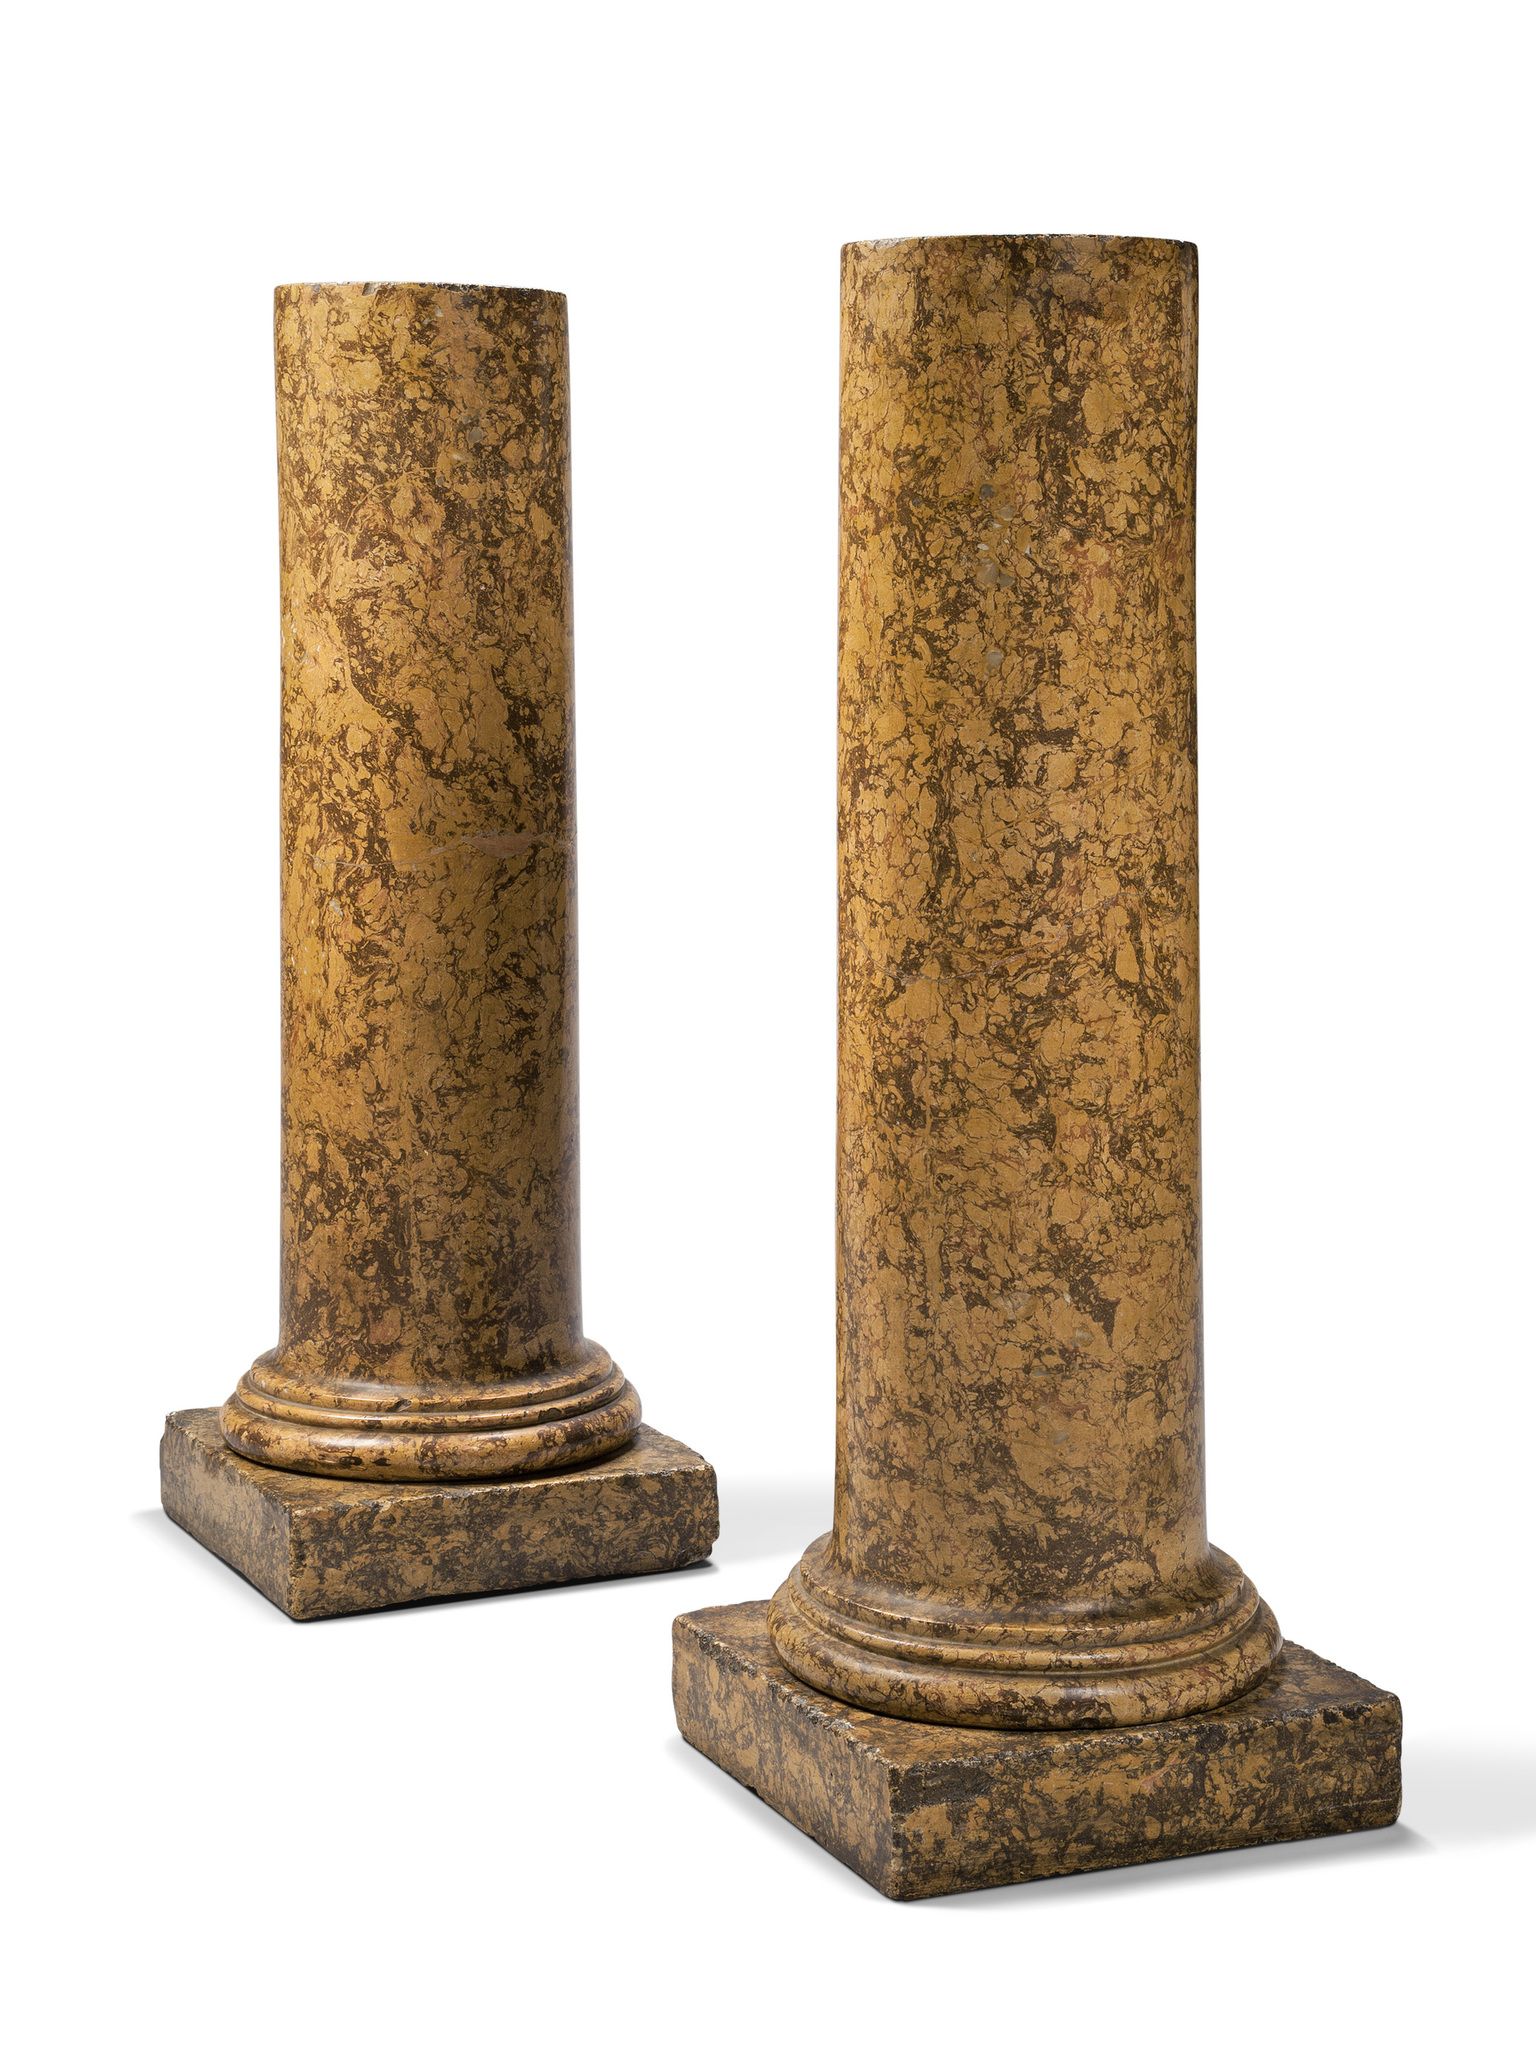 A Pair of Early 19th Century Scagliola Columns Italy circa 1800, the well-patinated surface